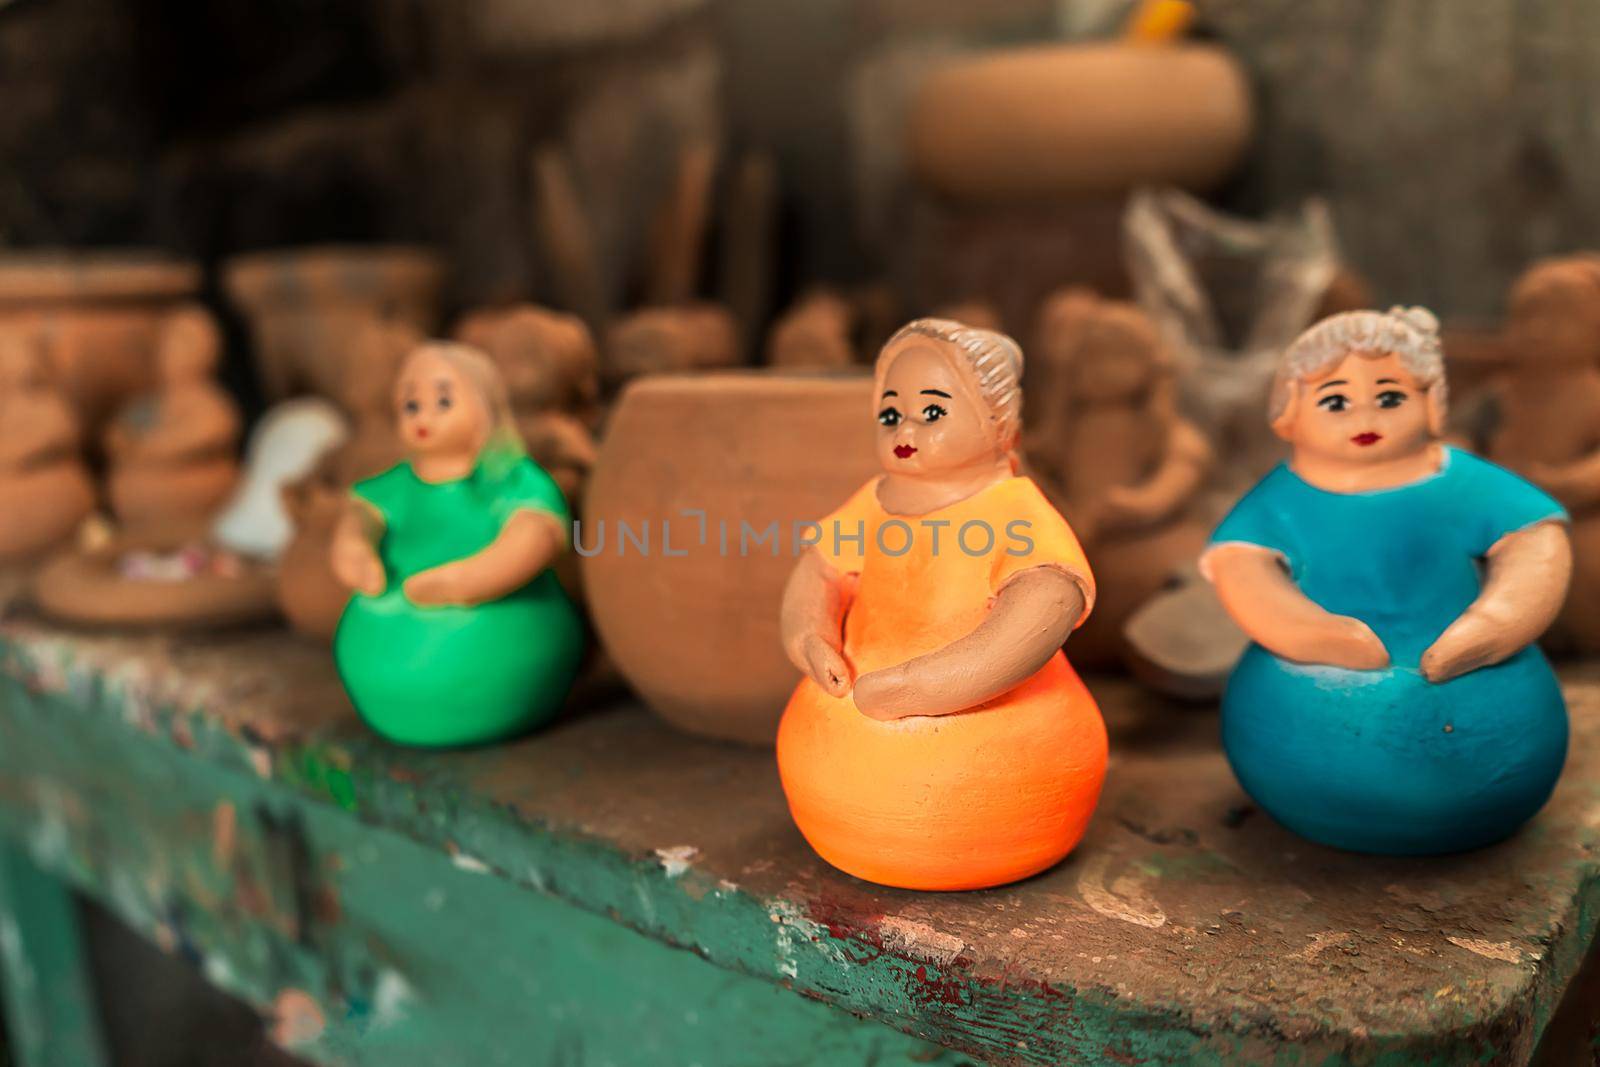 Clay dolls made by artisans from La Paz Centro, Nicaragua. Concept of culture and tourism in Latin America.